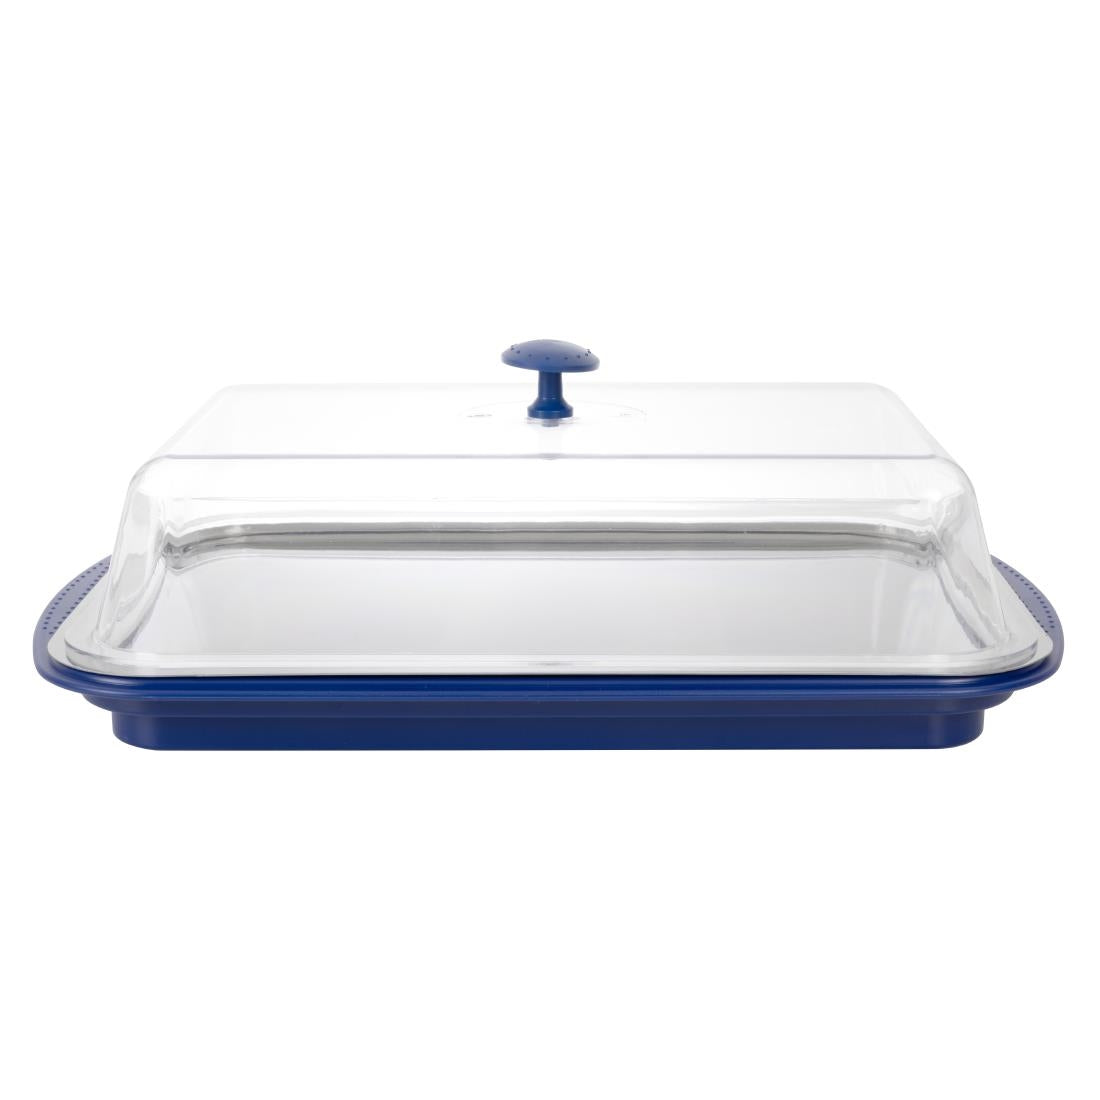 APS Cooling Display Tray and Cover JD Catering Equipment Solutions Ltd